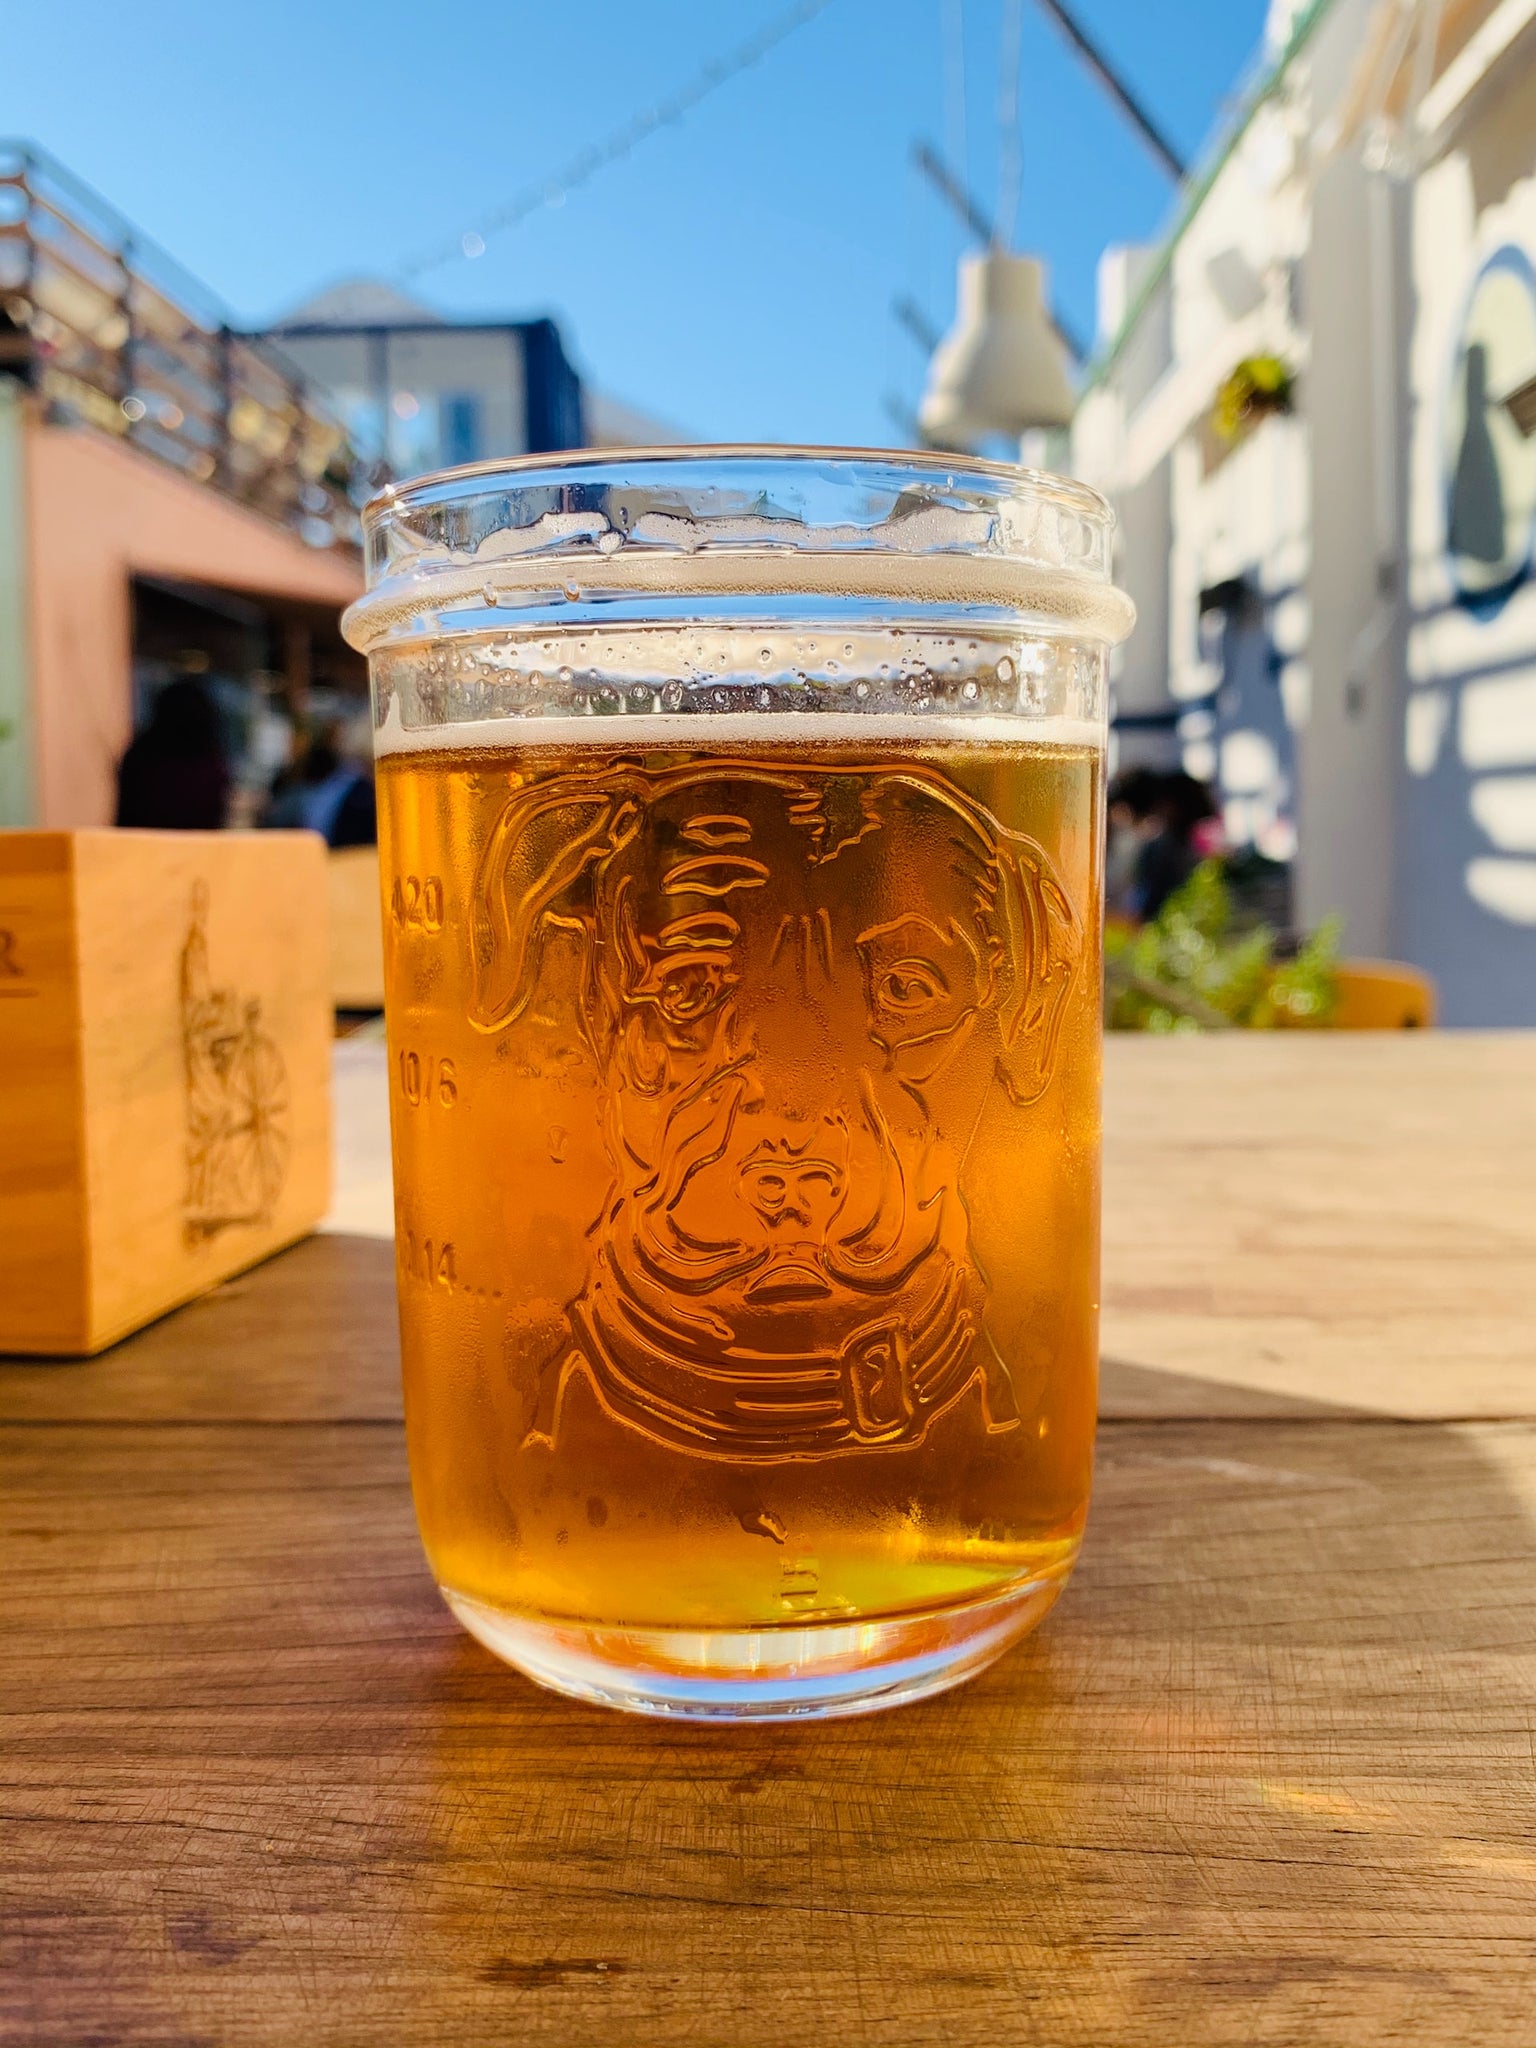 A glass of beer sits on an outdoor table, a dog's face is etched into the glass.